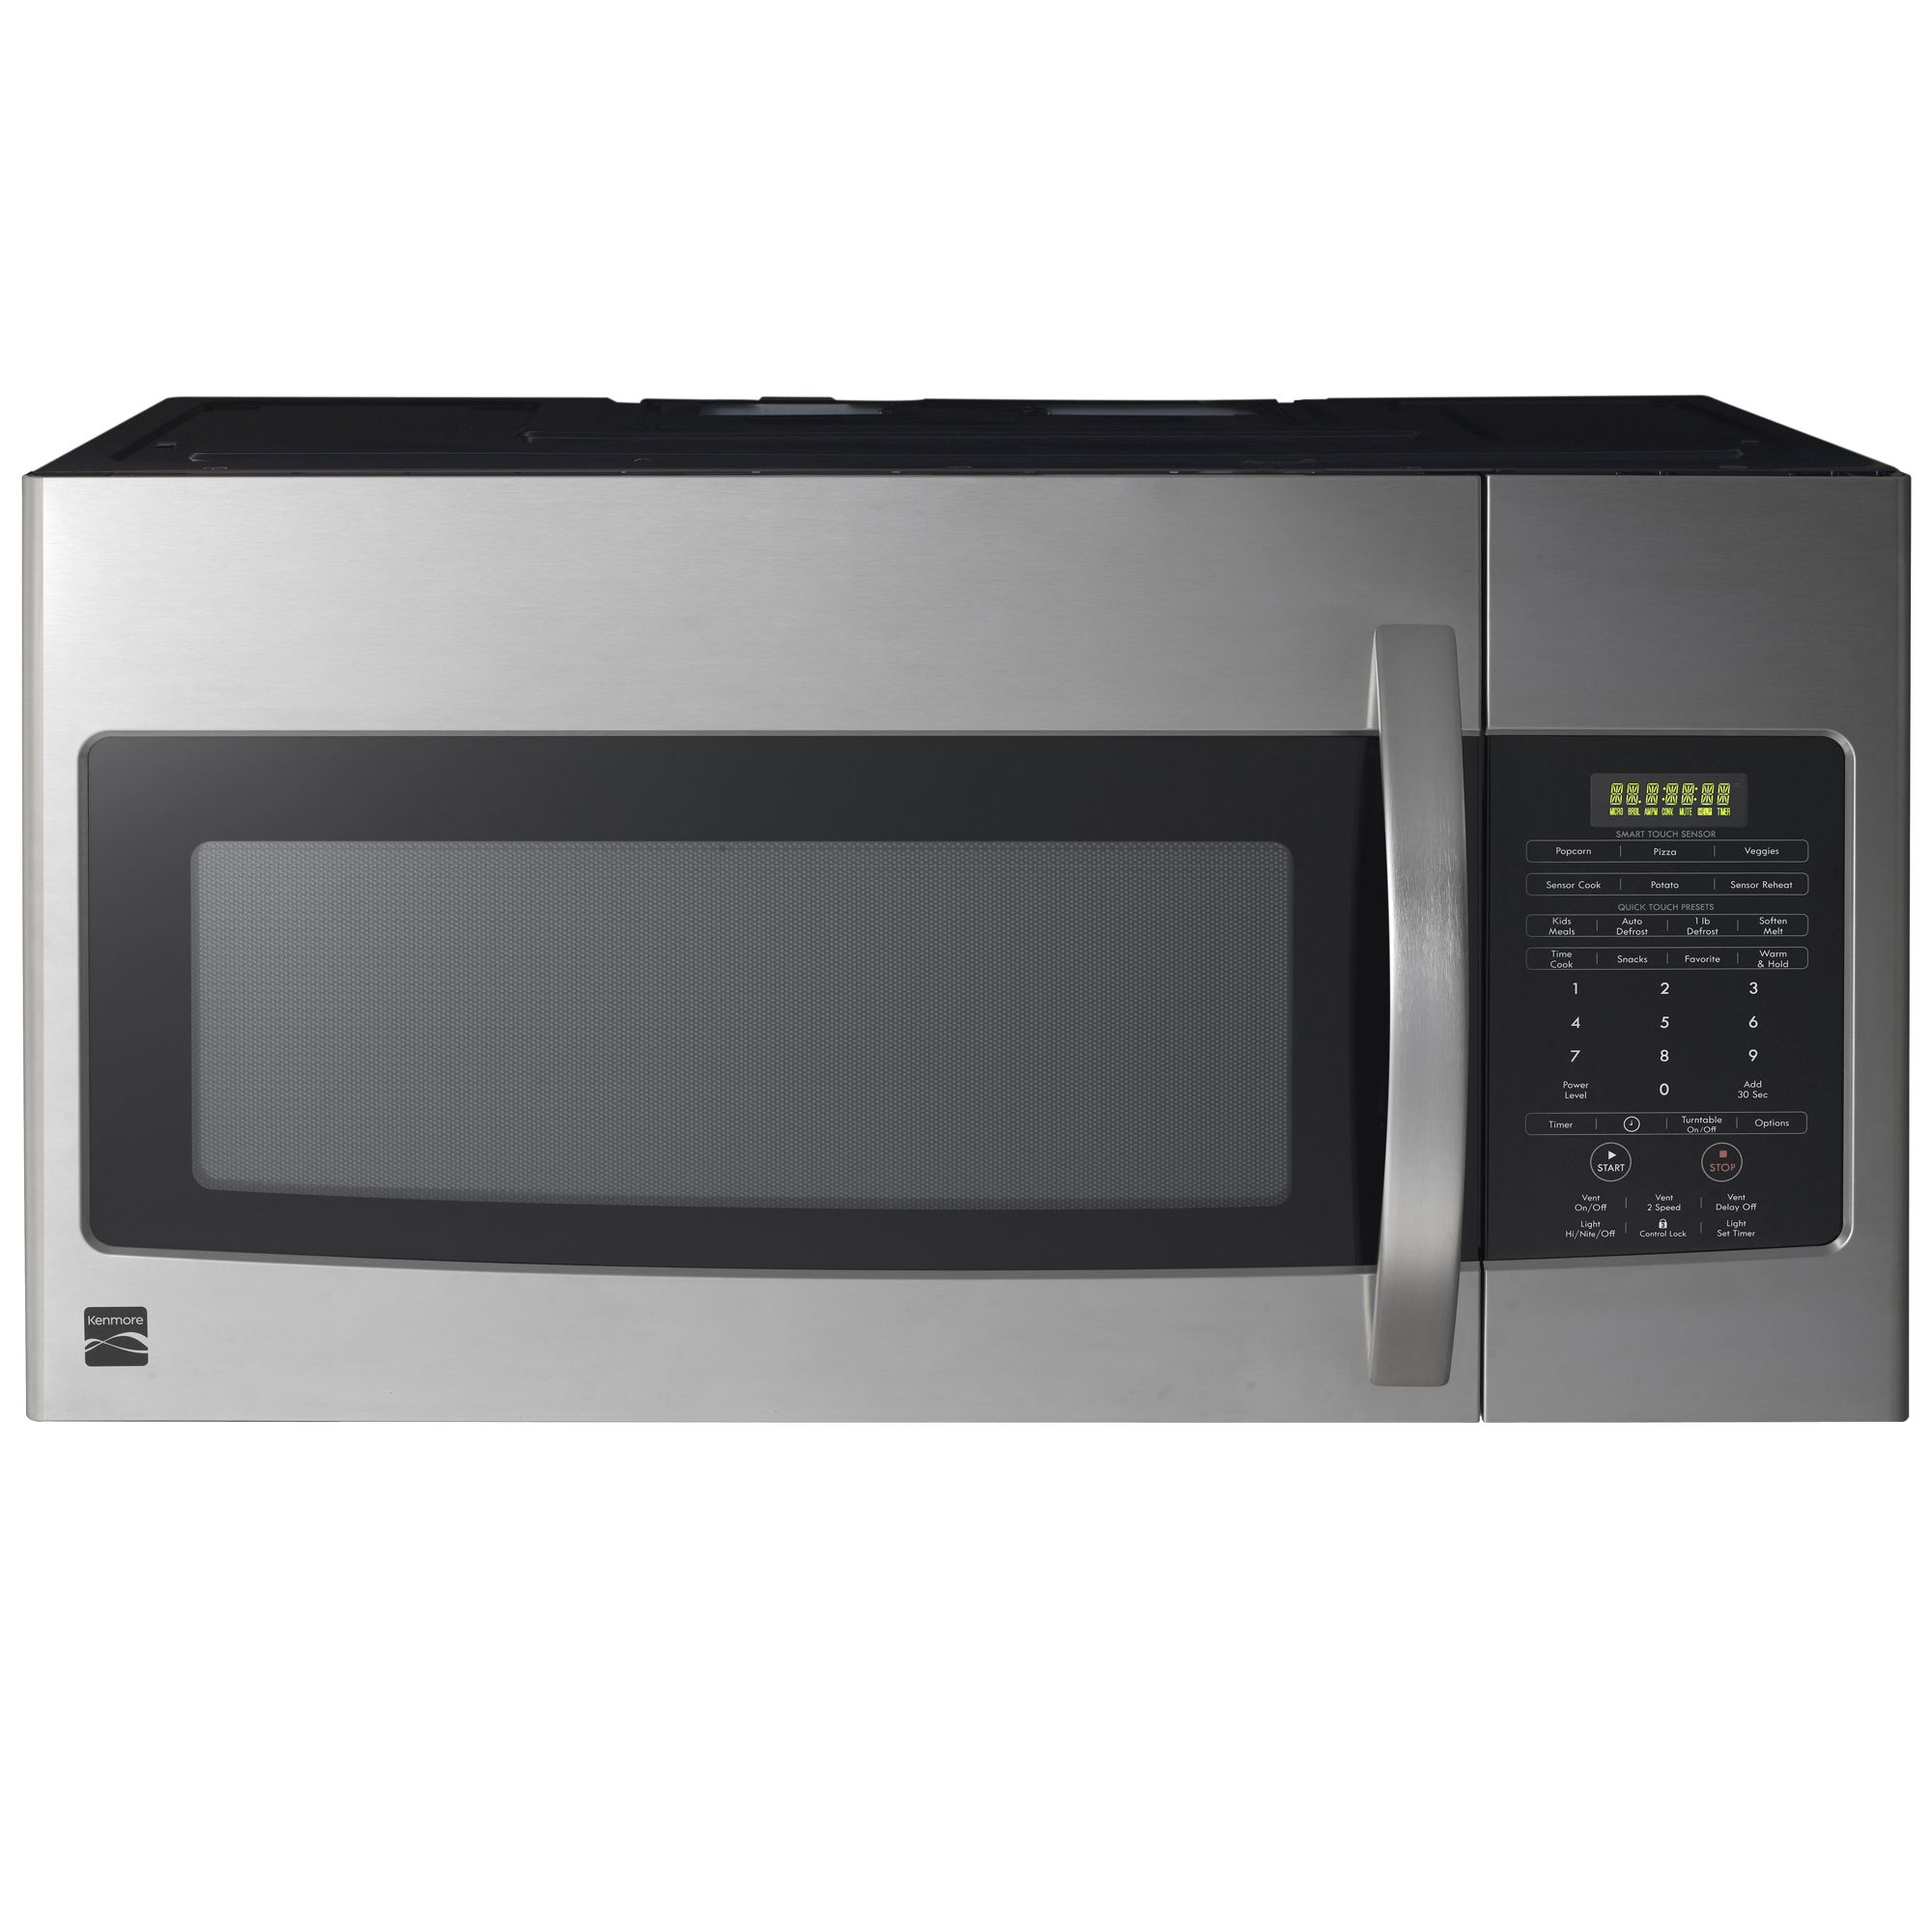 Kenmore 85043 1.7 cu. ft. Over-the-Range Microwave Oven - Stainless Steel